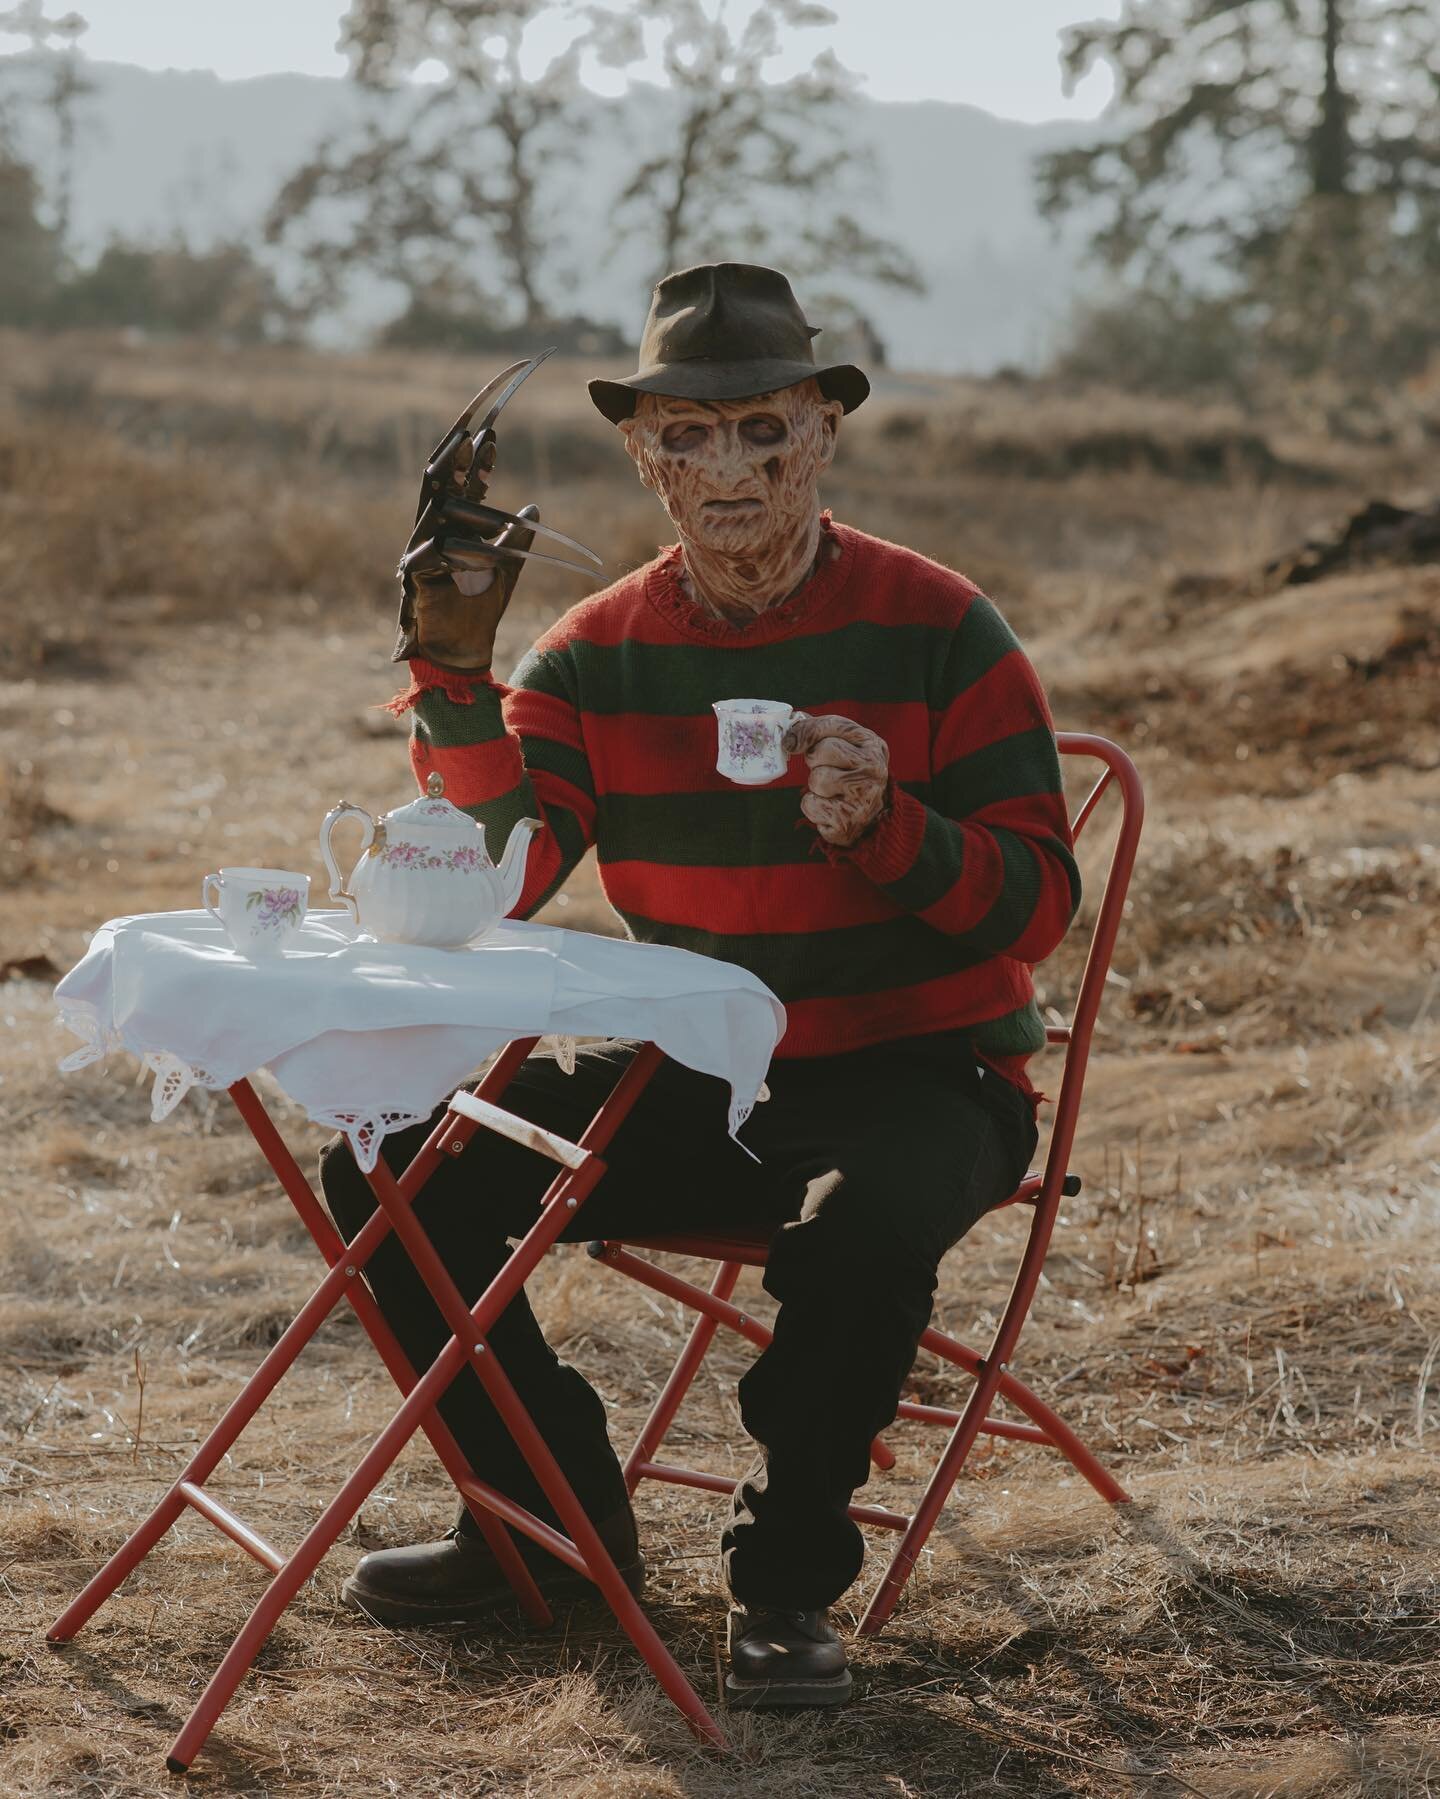 Countdown to Halloween 🎃

For the month of October, I will be sharing some of my favorite themed shoots.

Day 27: Tea Time with Freddy Krueger

Freddy Krueger: @derekbward 
📸 by @jacobhaberphotography

#anightmareonelmstreet #fridaythe13th #FreddyK